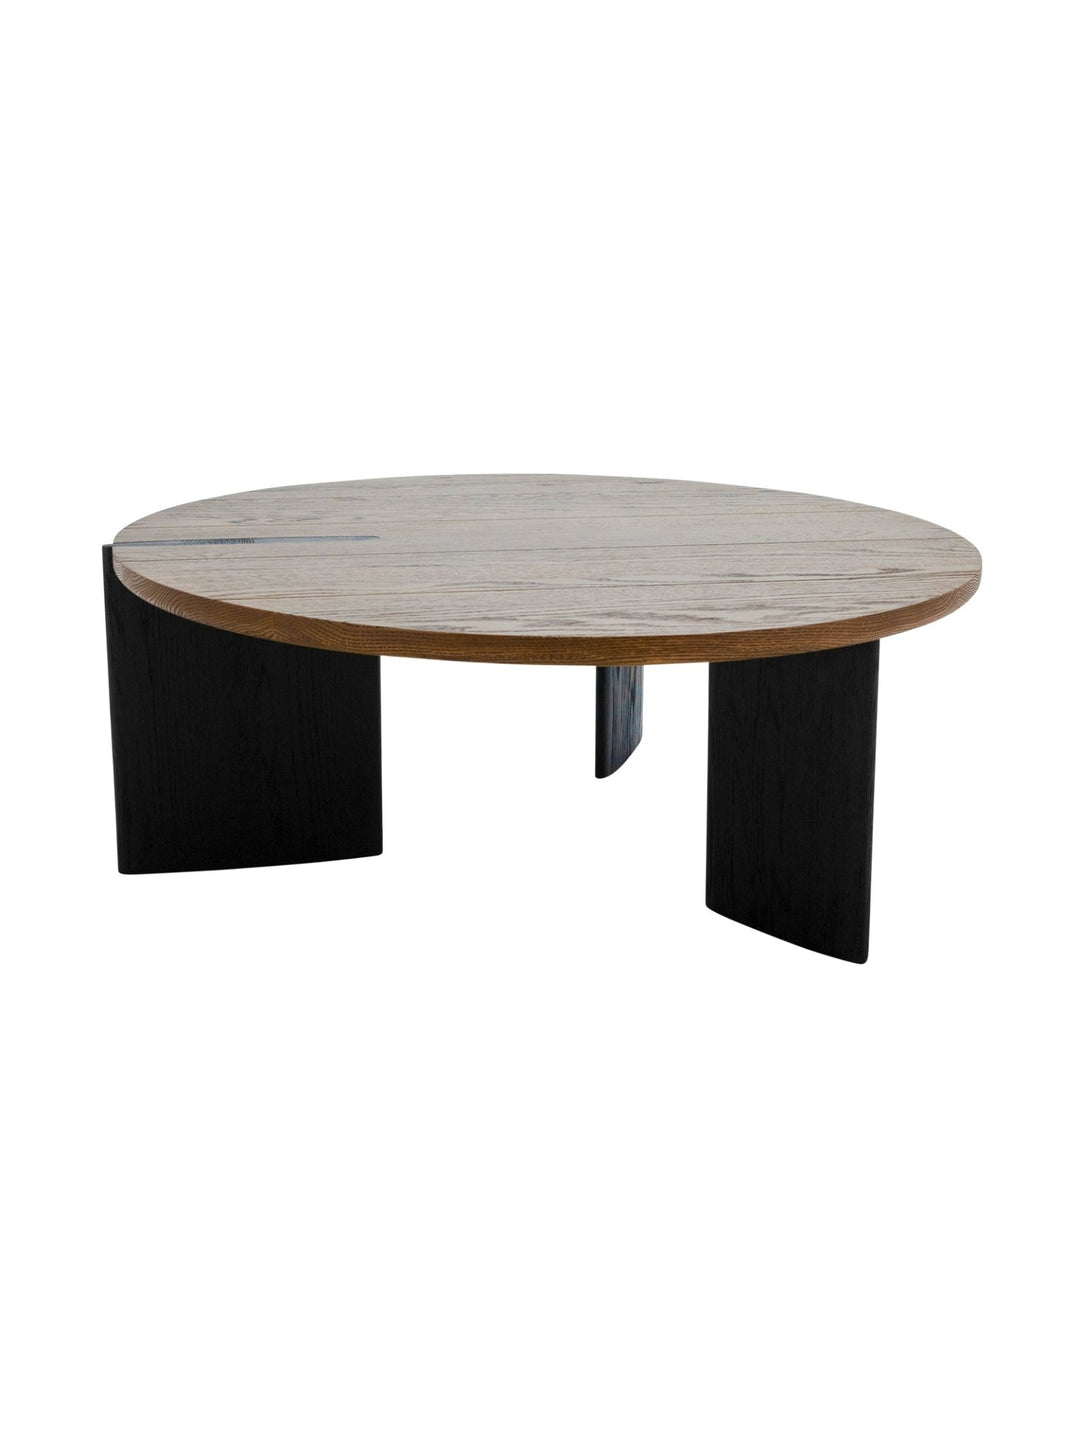 Directional Coffee Table in Earth - Coffee Tables - Hertex Haus - Coffee Tables